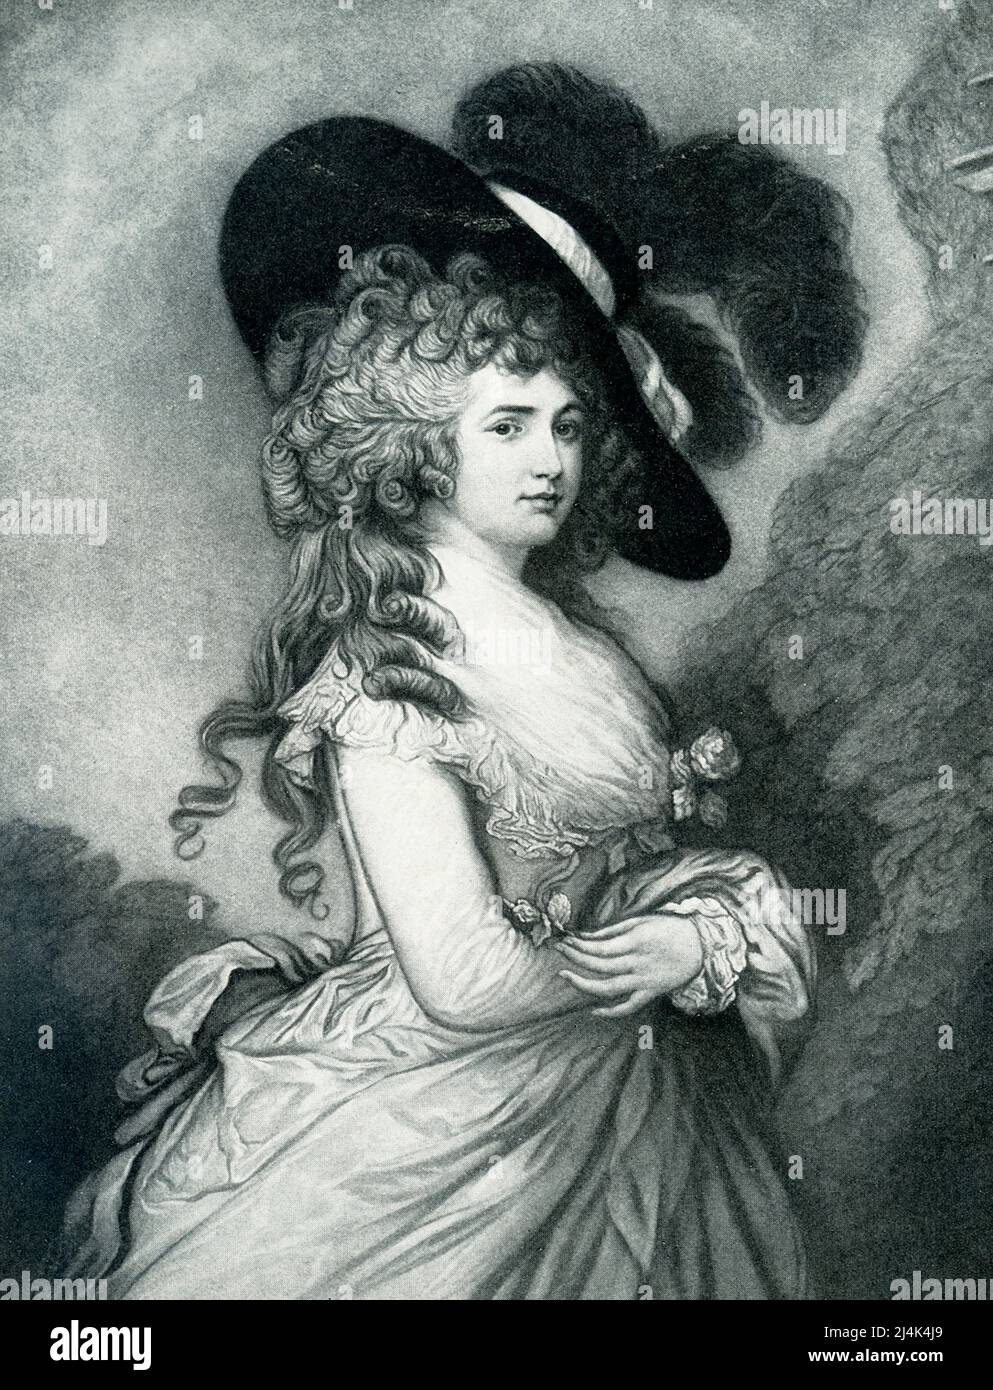 This 1903 image shows the Duchess of Devonshire, from a painting by Gainsborough. Georgiana Cavendish, Duchess of Devonshire (died 1806) was an English socialite,  political organizer, style icon, author, and activist. Thomas Gainsborough (died 1788) was an English portrait painter and landscape artist. He was a founding member of England's Royal Academy of the Arts. Among his best known works are The Blue Boy, Portrait of Mrs. Graham, The Painter's Daughters, and Cottage Girl with Dog and Pitcher. Huntington Library in California. Stock Photo